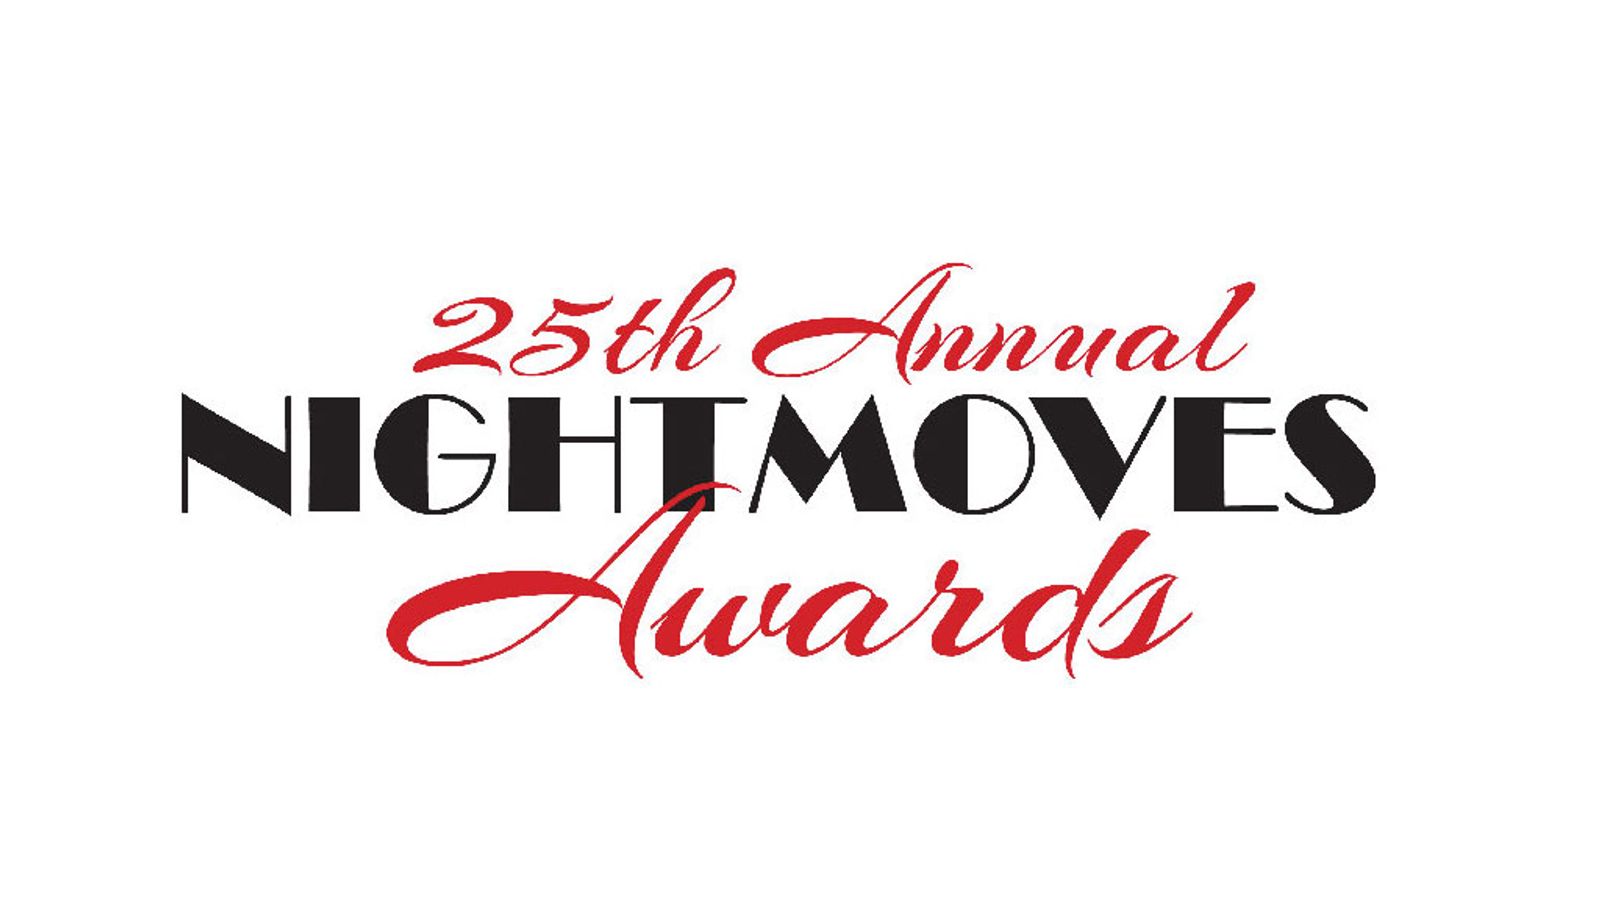 Winners Of 25th Annual NightMoves Awards Winners Announced photo image